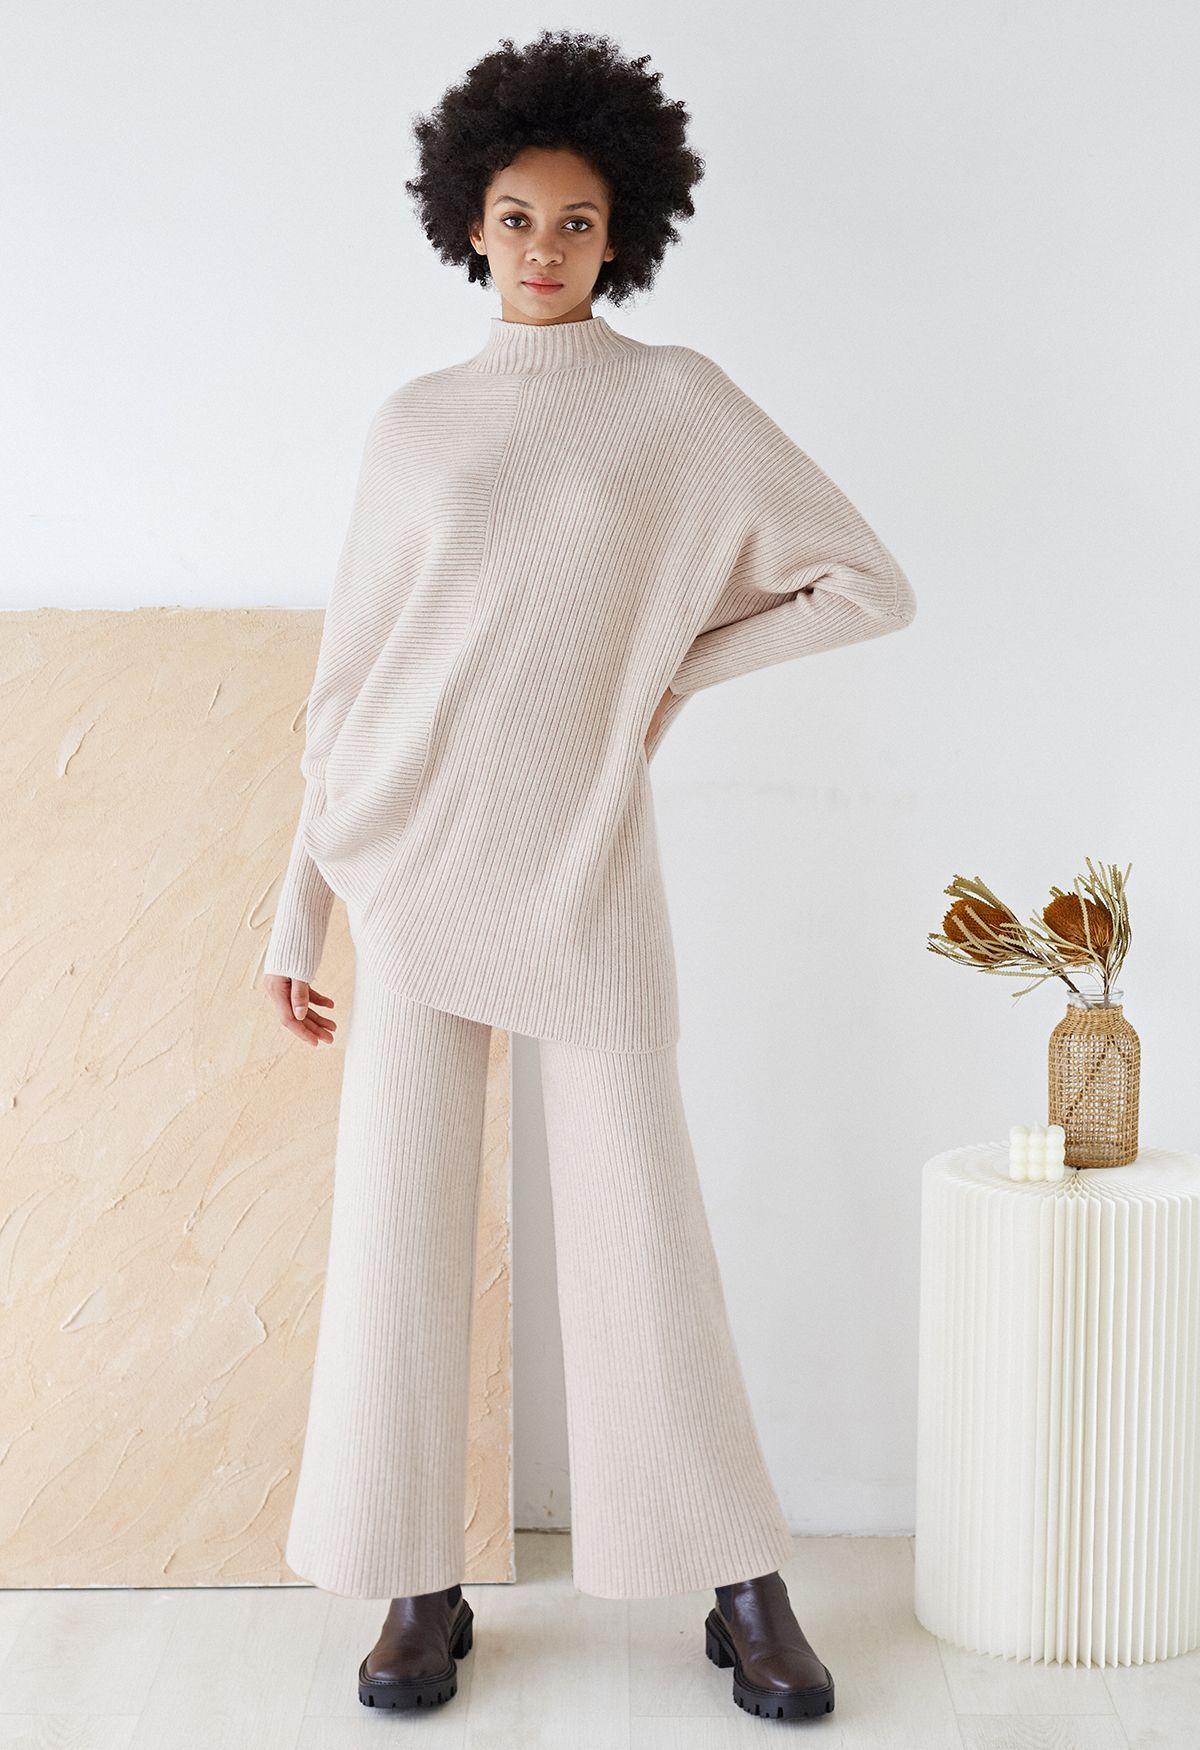 Asymmetric Batwing Sleeve Sweater and Pants Knit Set in Light Tan | Chicwish